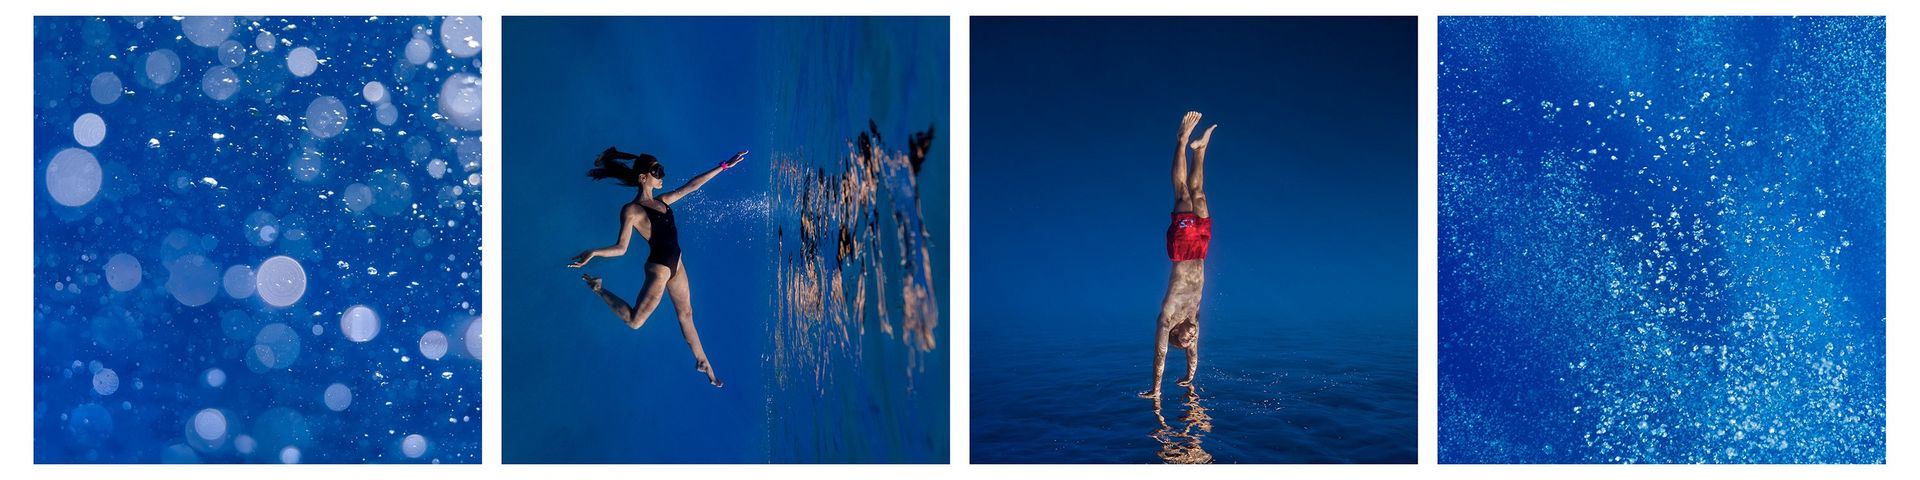 A sequence of water-themed images. L-R: a square blue scene where the lens is speckled with water. A square scene where a swimmer in a black costume sees their reflection in water. A square scene showing a man in red swimming shorts diving hands first into water, his fingers just touching the surface. And finally, another blue scene, showing a splash of water as though there has been impact.